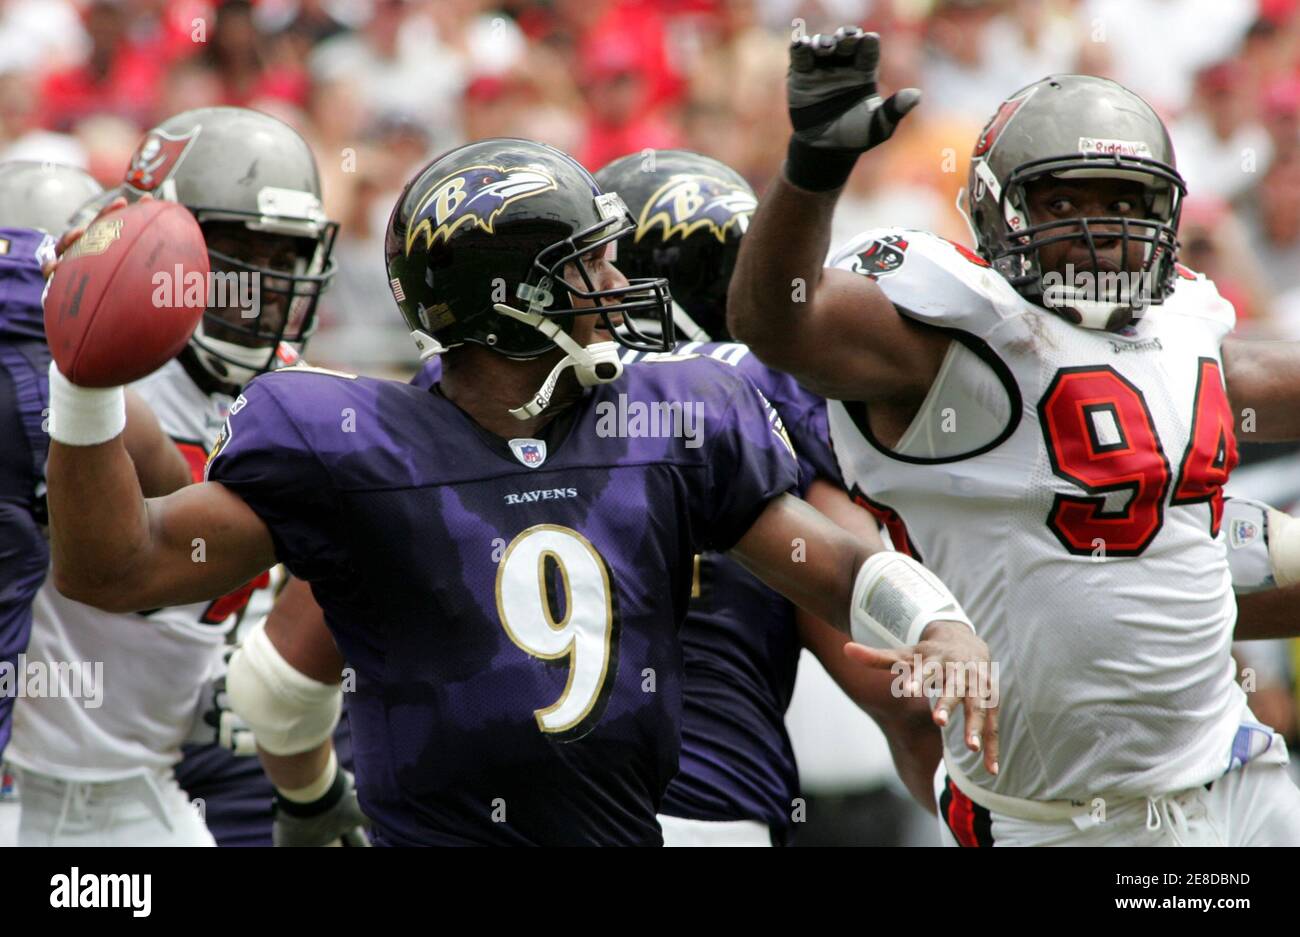 Baltimore Ravens quarterback Steve McNair (9) throws under pressure from Tampa Bay Buccaneers defender Greg Spires (94) during their NFL game in Tampa Bay, Florida, September 10, 2006. REUTERS/Rick Fowler (UNITED STATES) Stock Photo